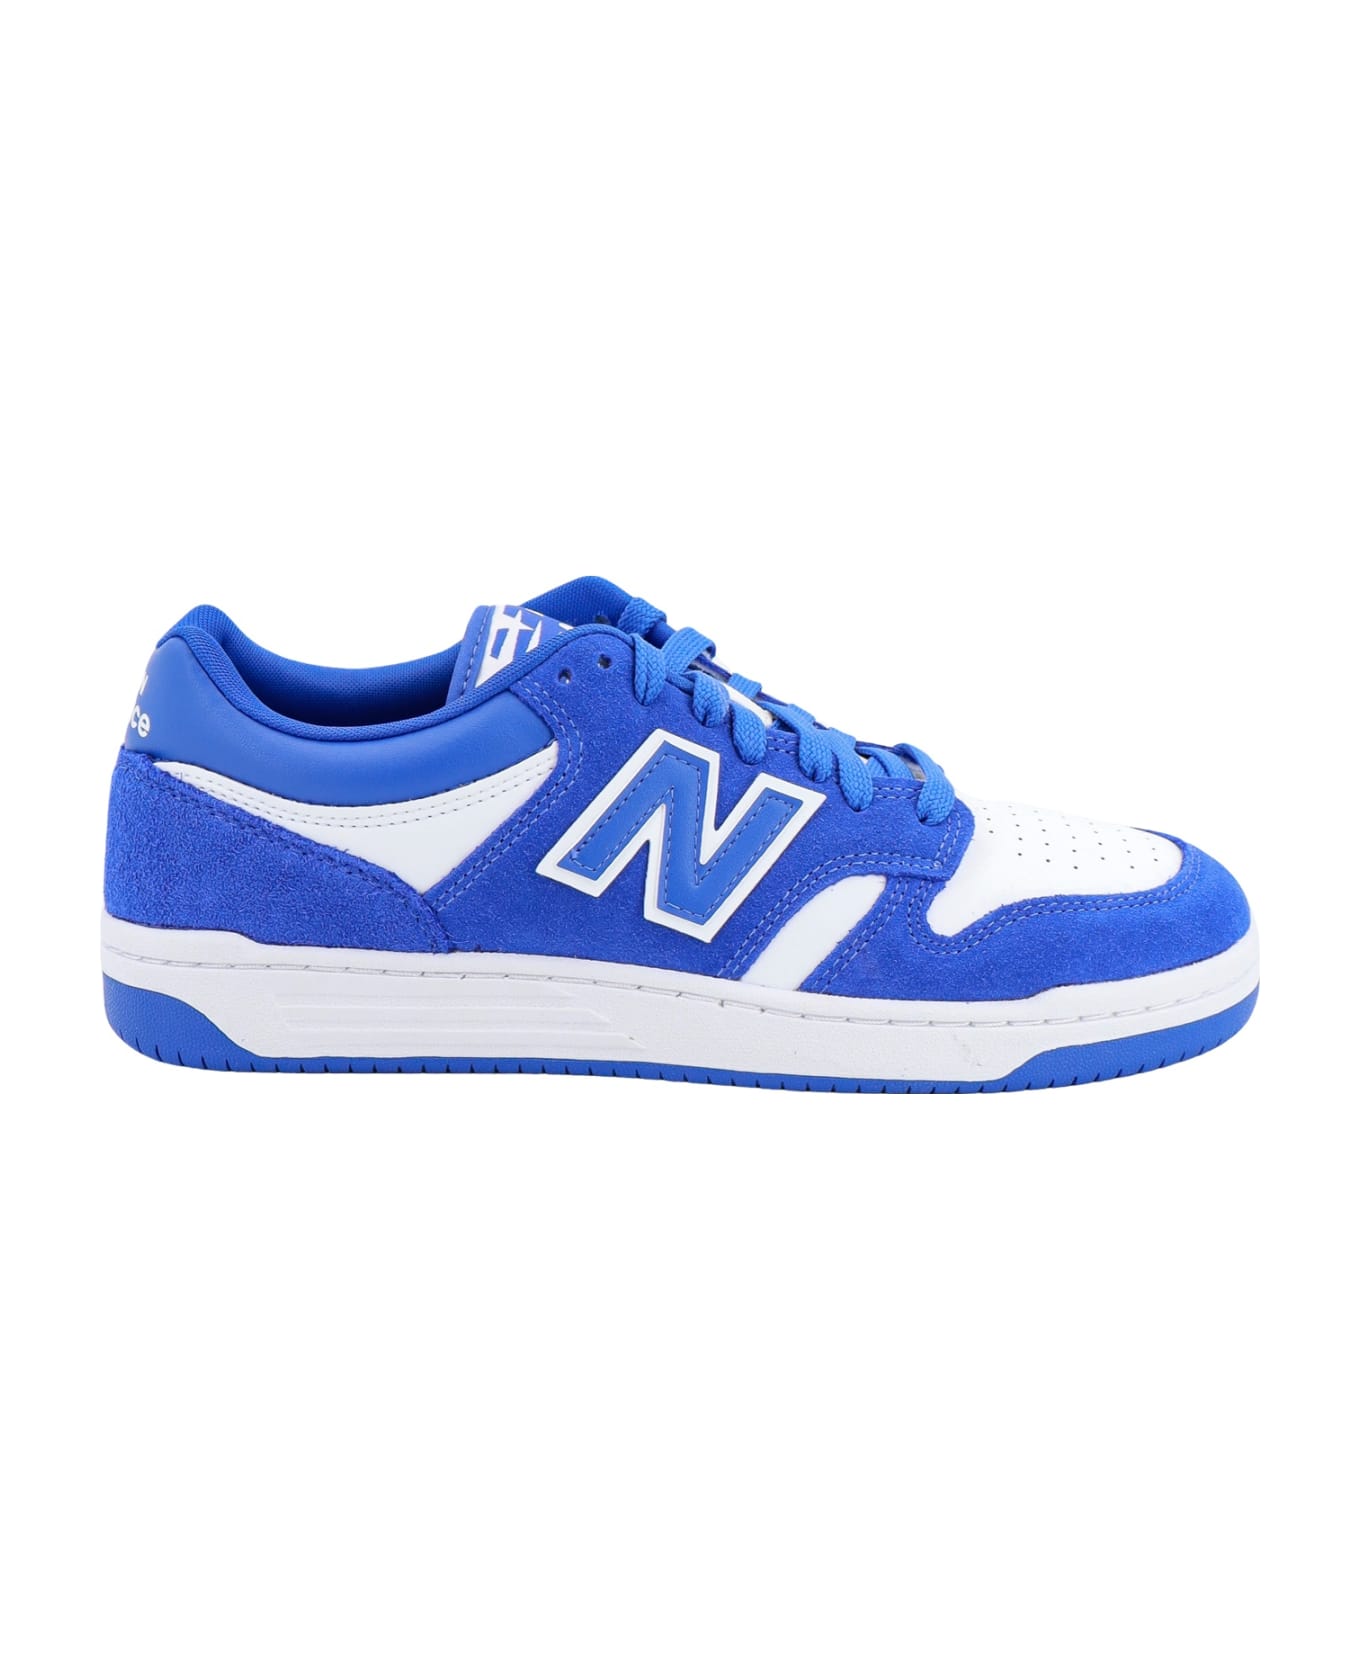 New Balance 480 Sneakers - Blue